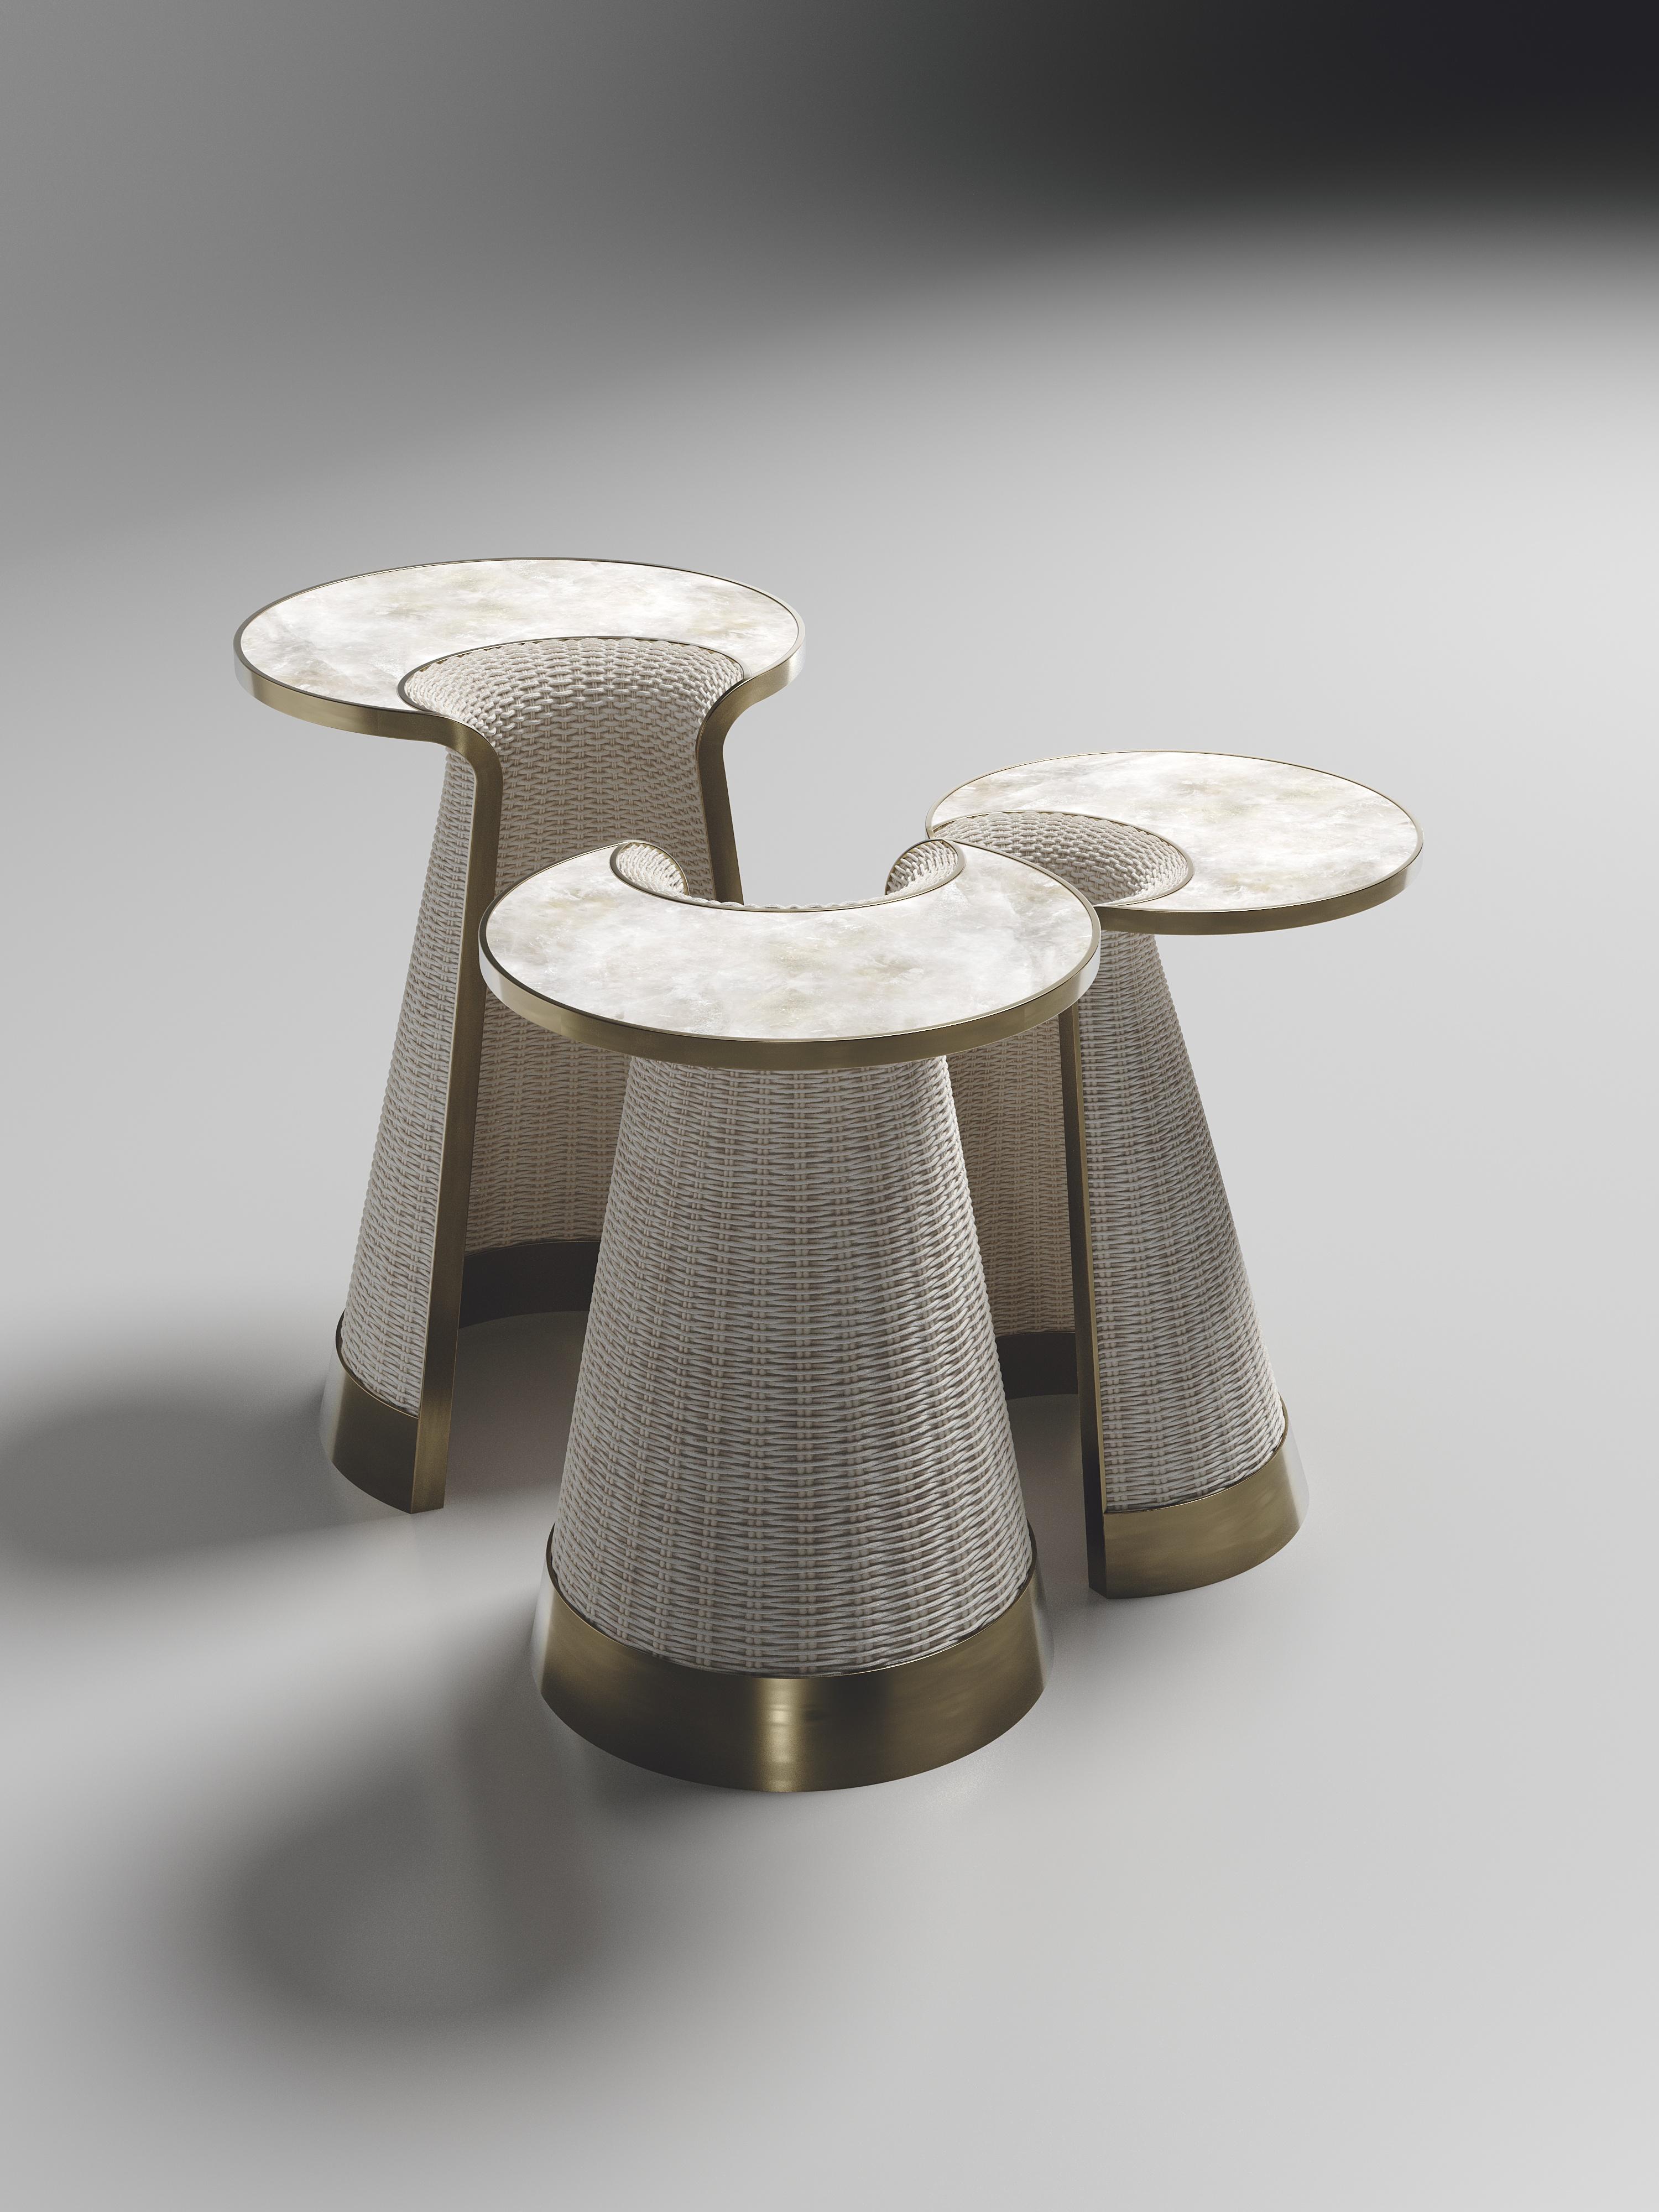 The Nymphea Set of 3 Nesting Side tables by R & Y Augousti are a part of their  new Rattan capsule launch. The pieces explore the brand's iconic DNA of bringing old world artisanal craft into a contemporary and utterly luxury feel. This set is done